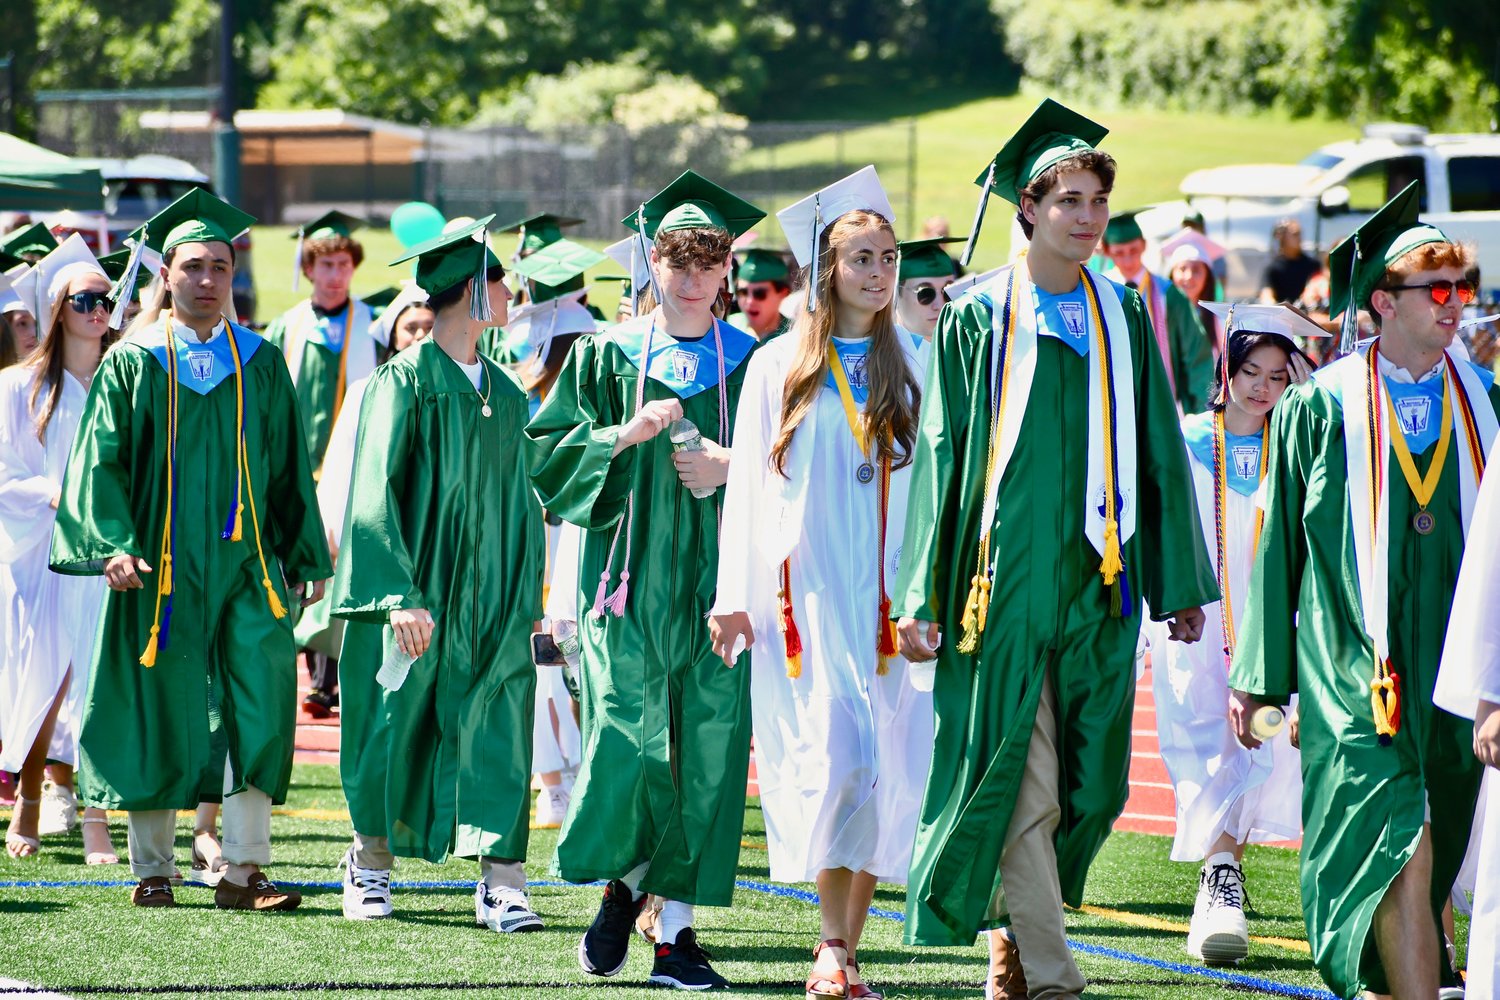 Locust Valley High School graduates entered the commencement ceremony as loved ones cheered.